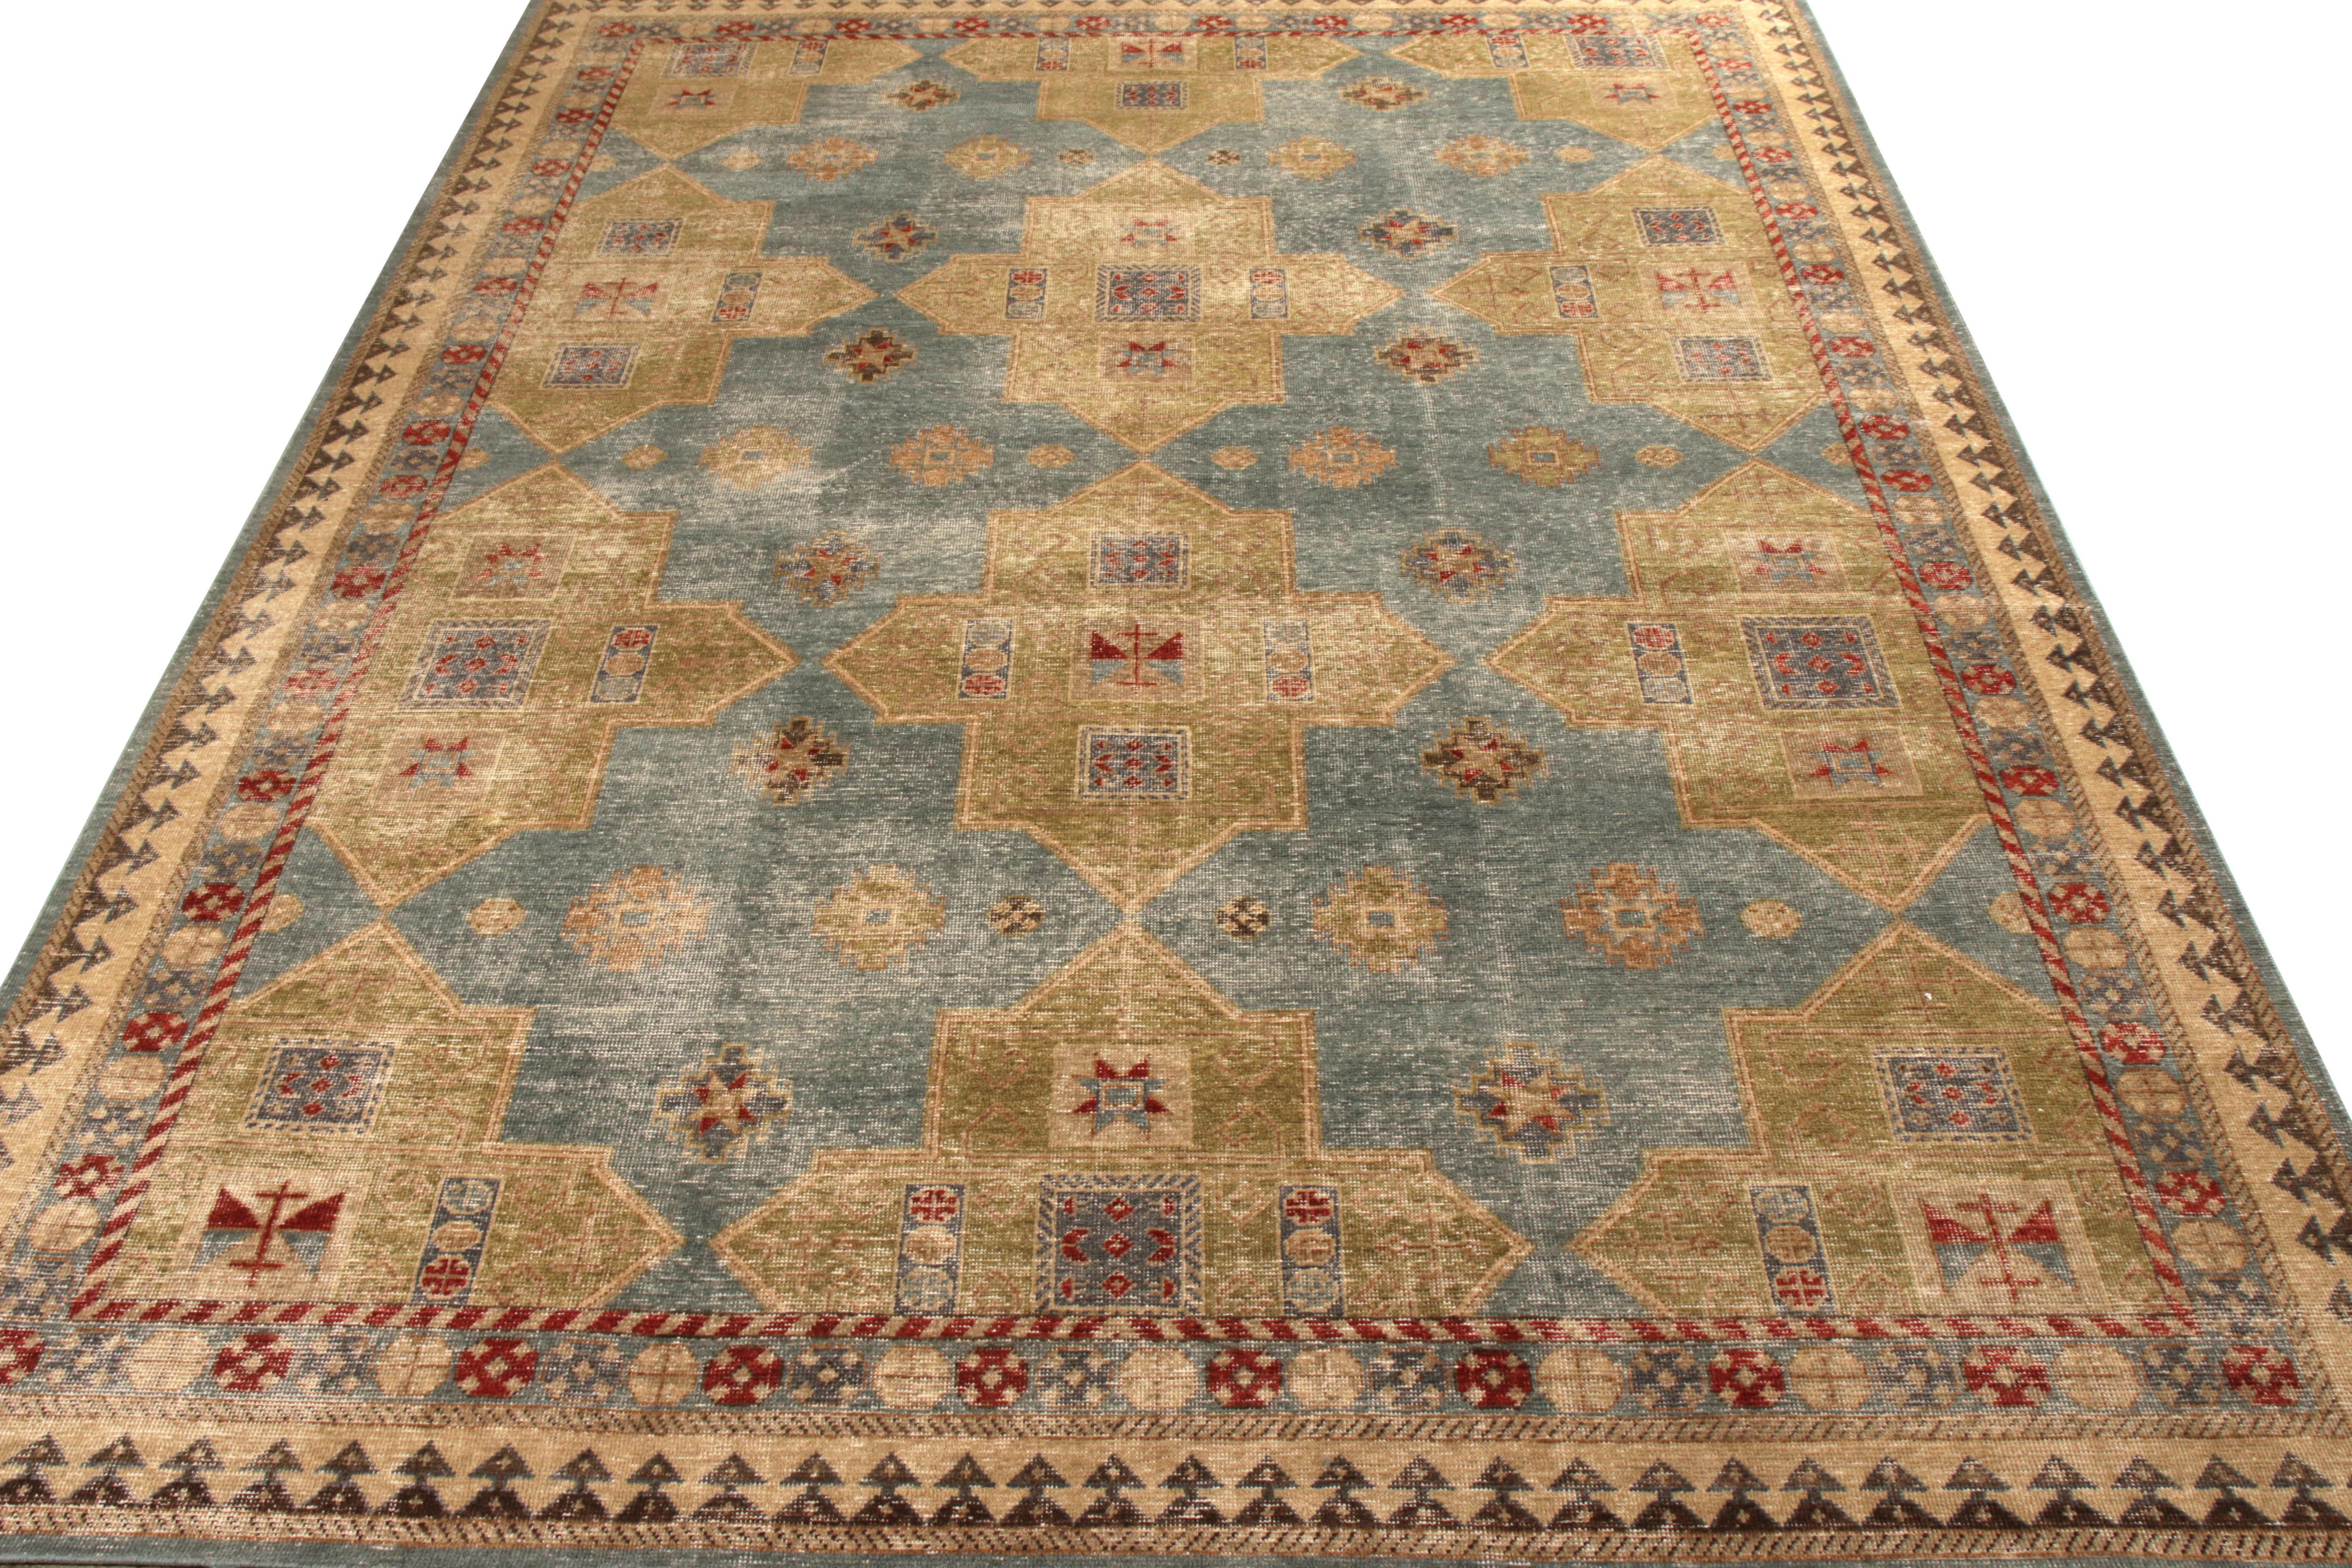 A 10 x 14 from Rug & Kilim’s Homage Collection, hand knotted in wool with our take on shabby-chic, distressed texture and classic aesthetics. Enjoying a subtle green playing with blue and beige-brown hues, sitting beautifully in this geometric